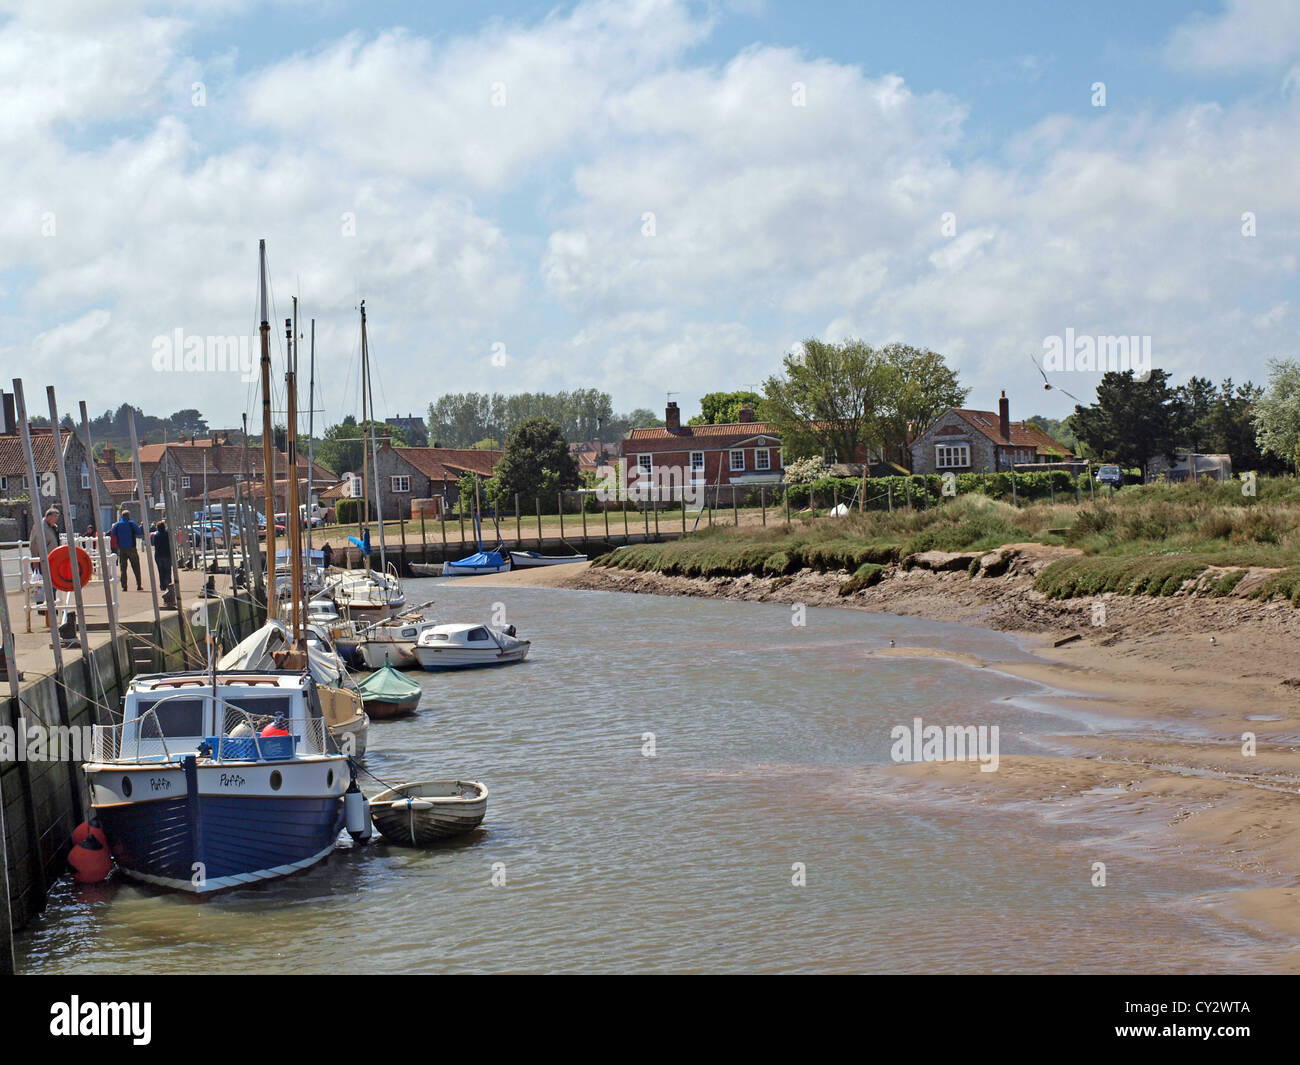 Boats stranded on the mud flats at low tide Blakeney Quay Stock Photo